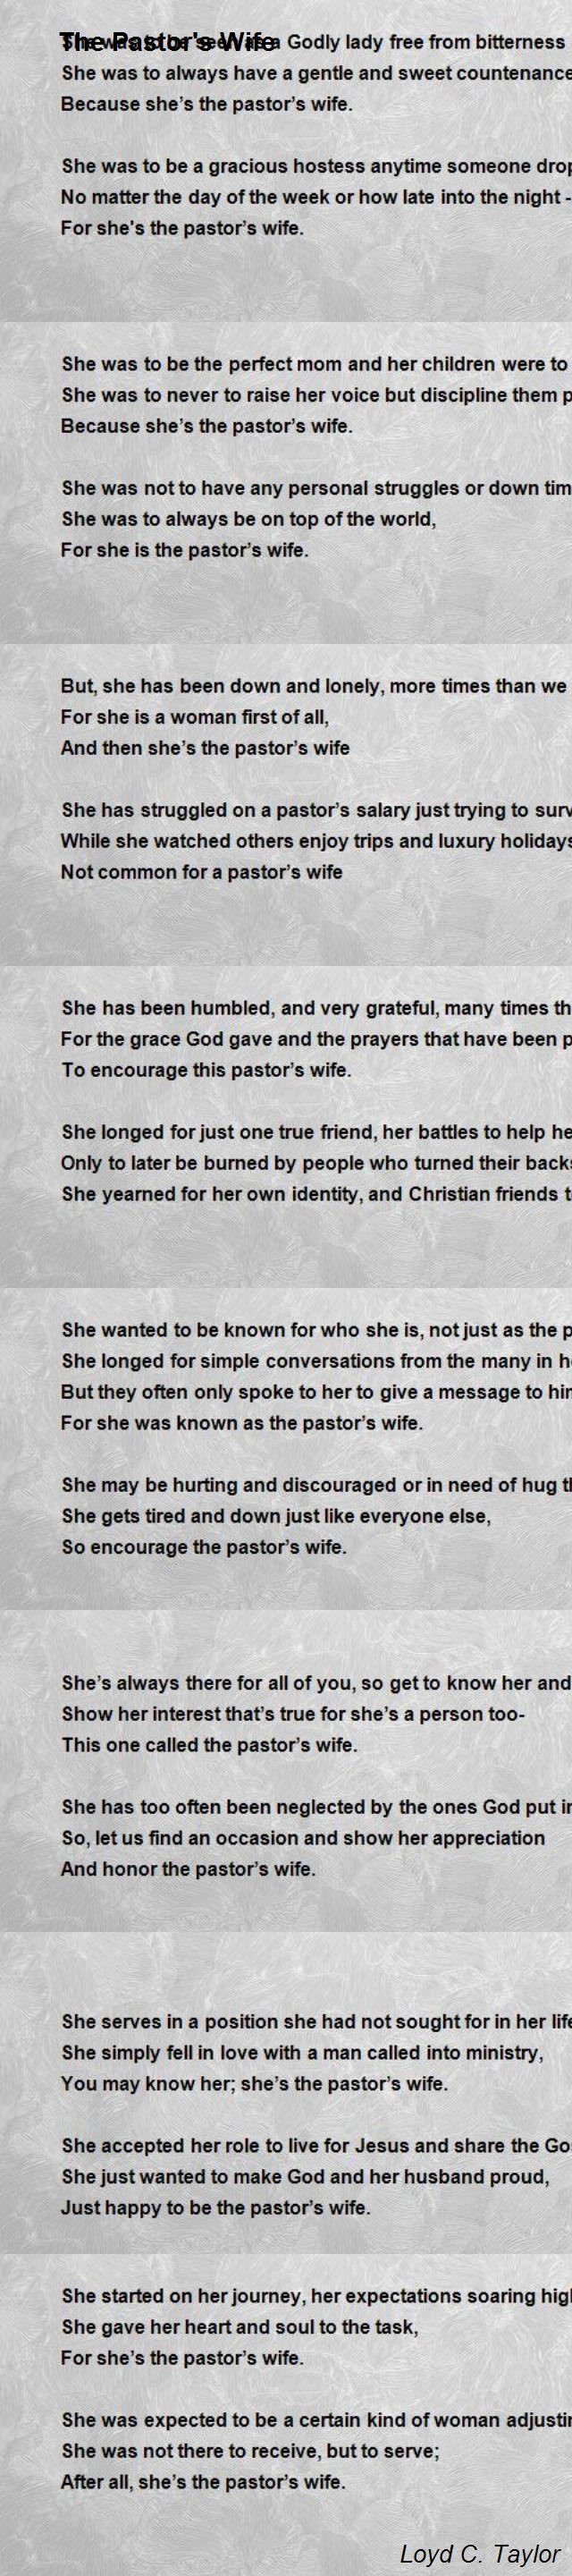 What is a good poem to honor a pastor's wife?